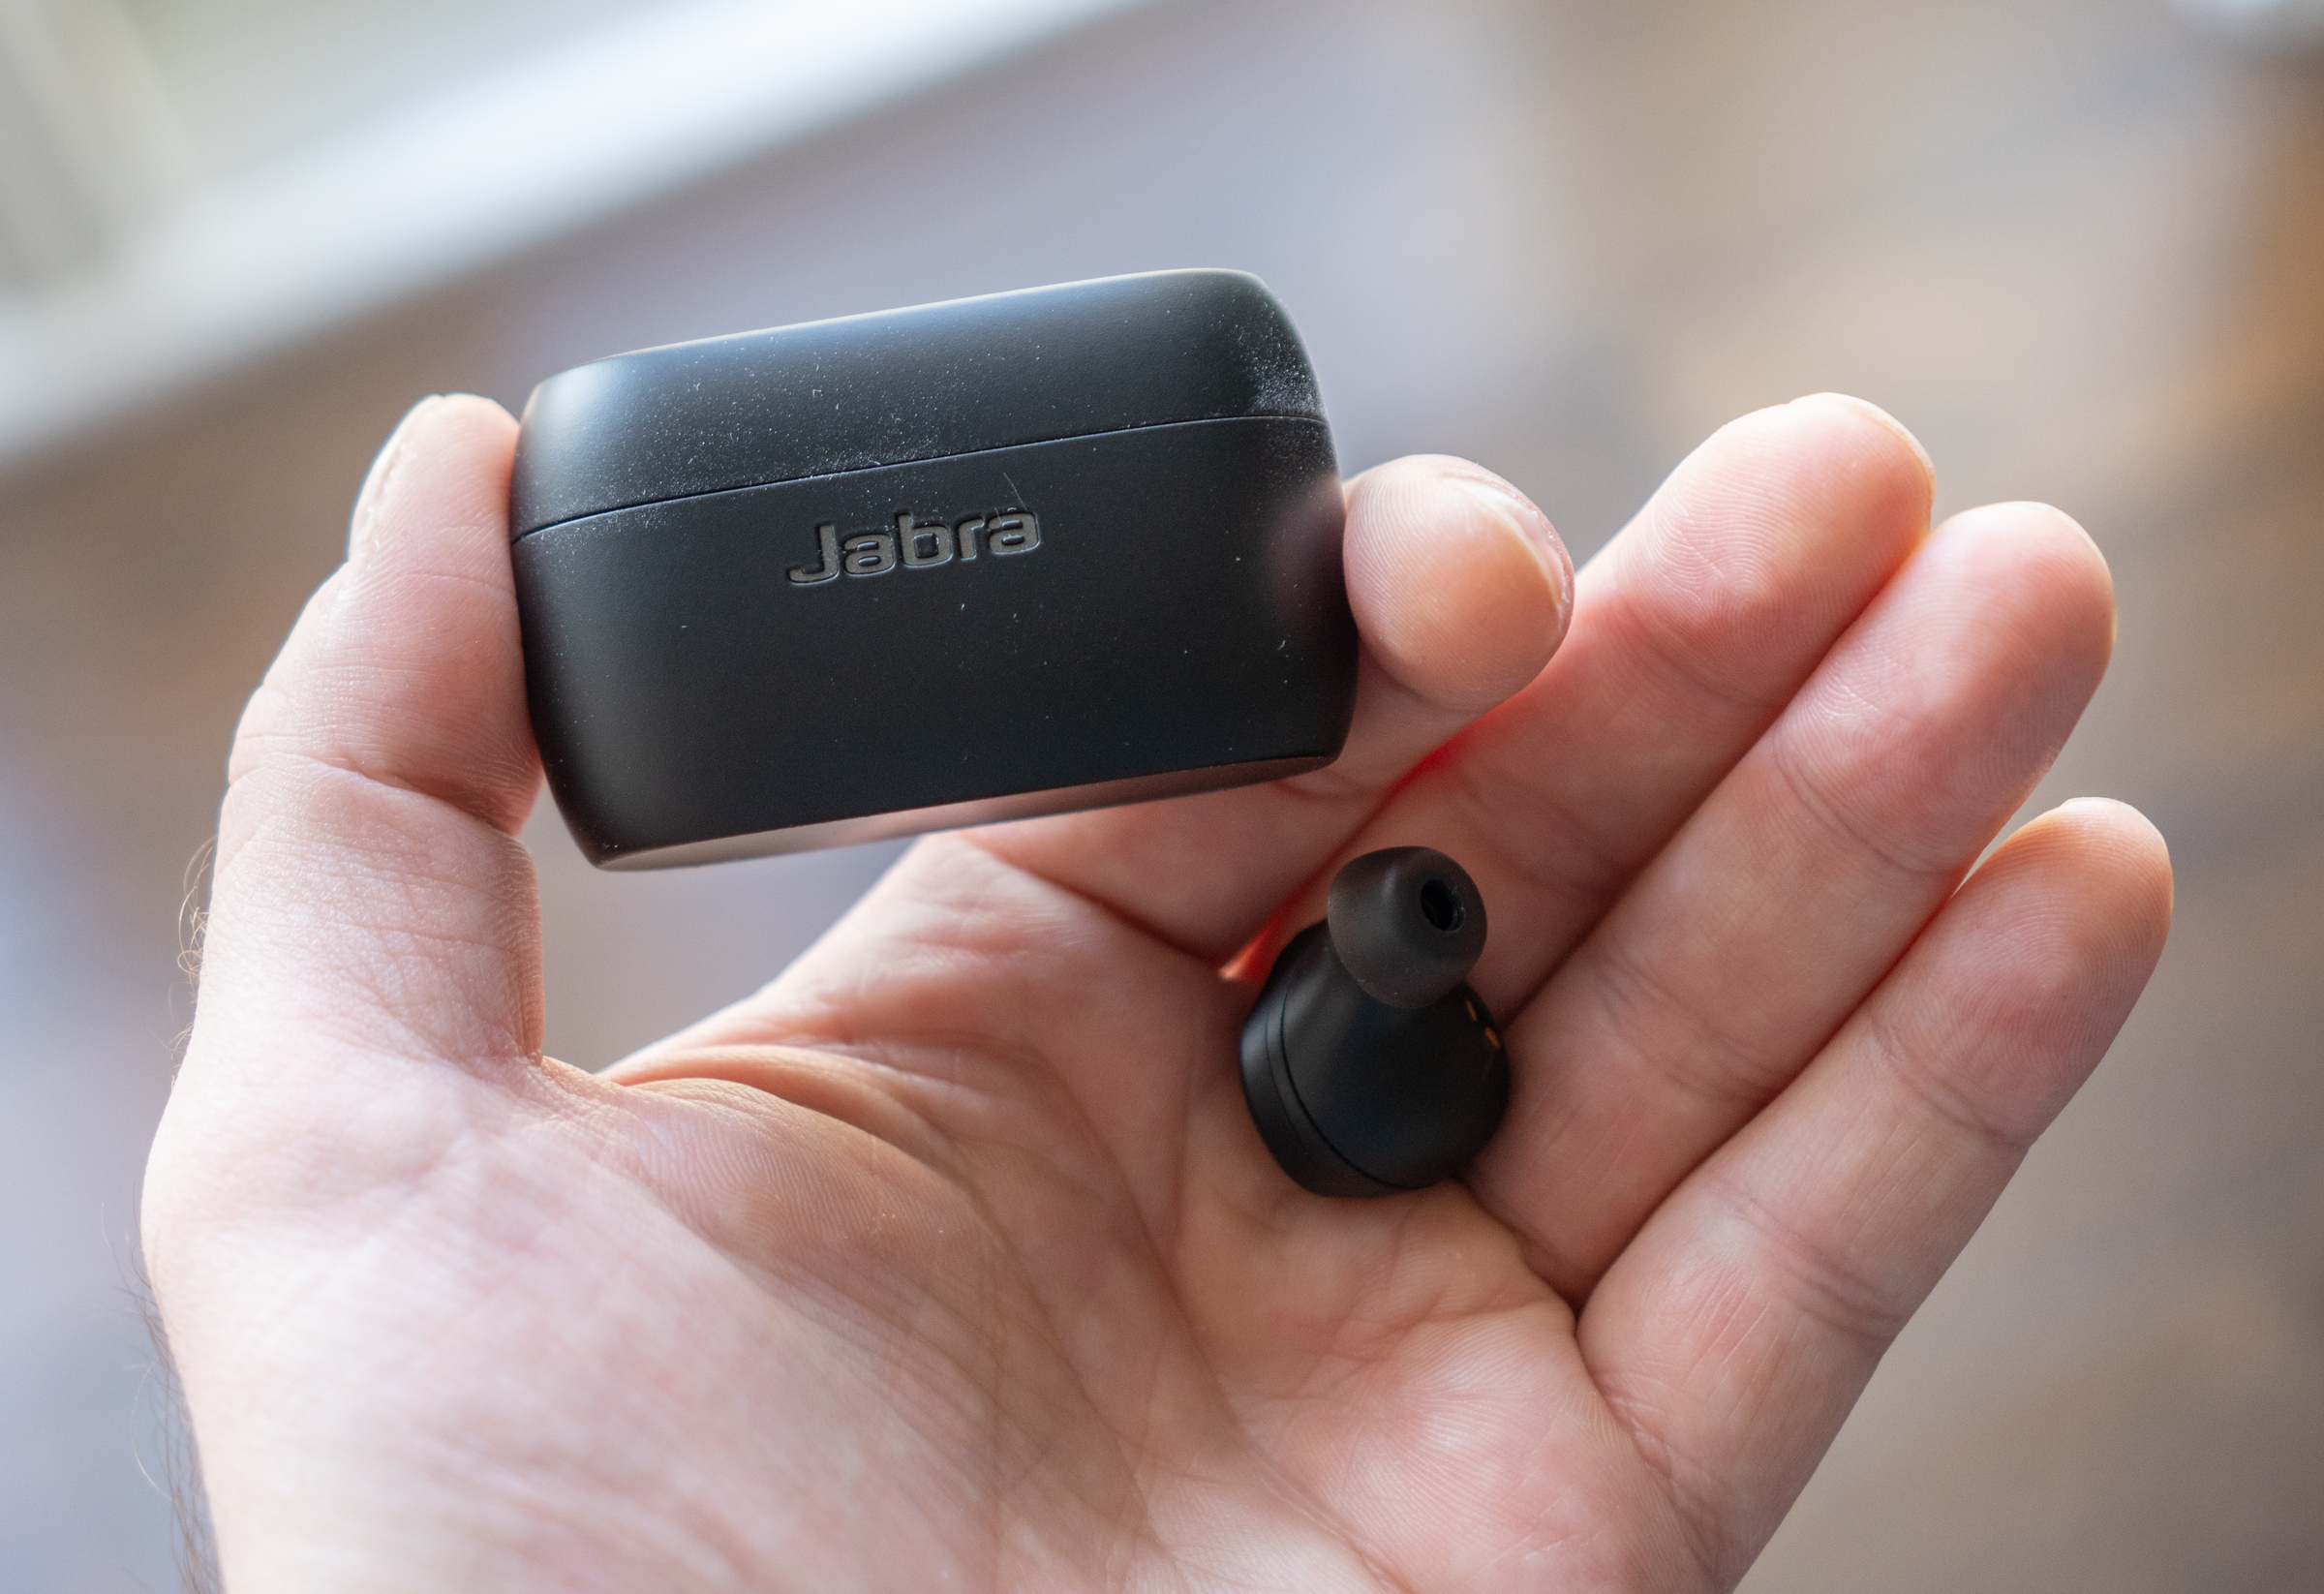 Jabra’s Elite Active 75t earbuds offer great value and sound for both workouts and workdays